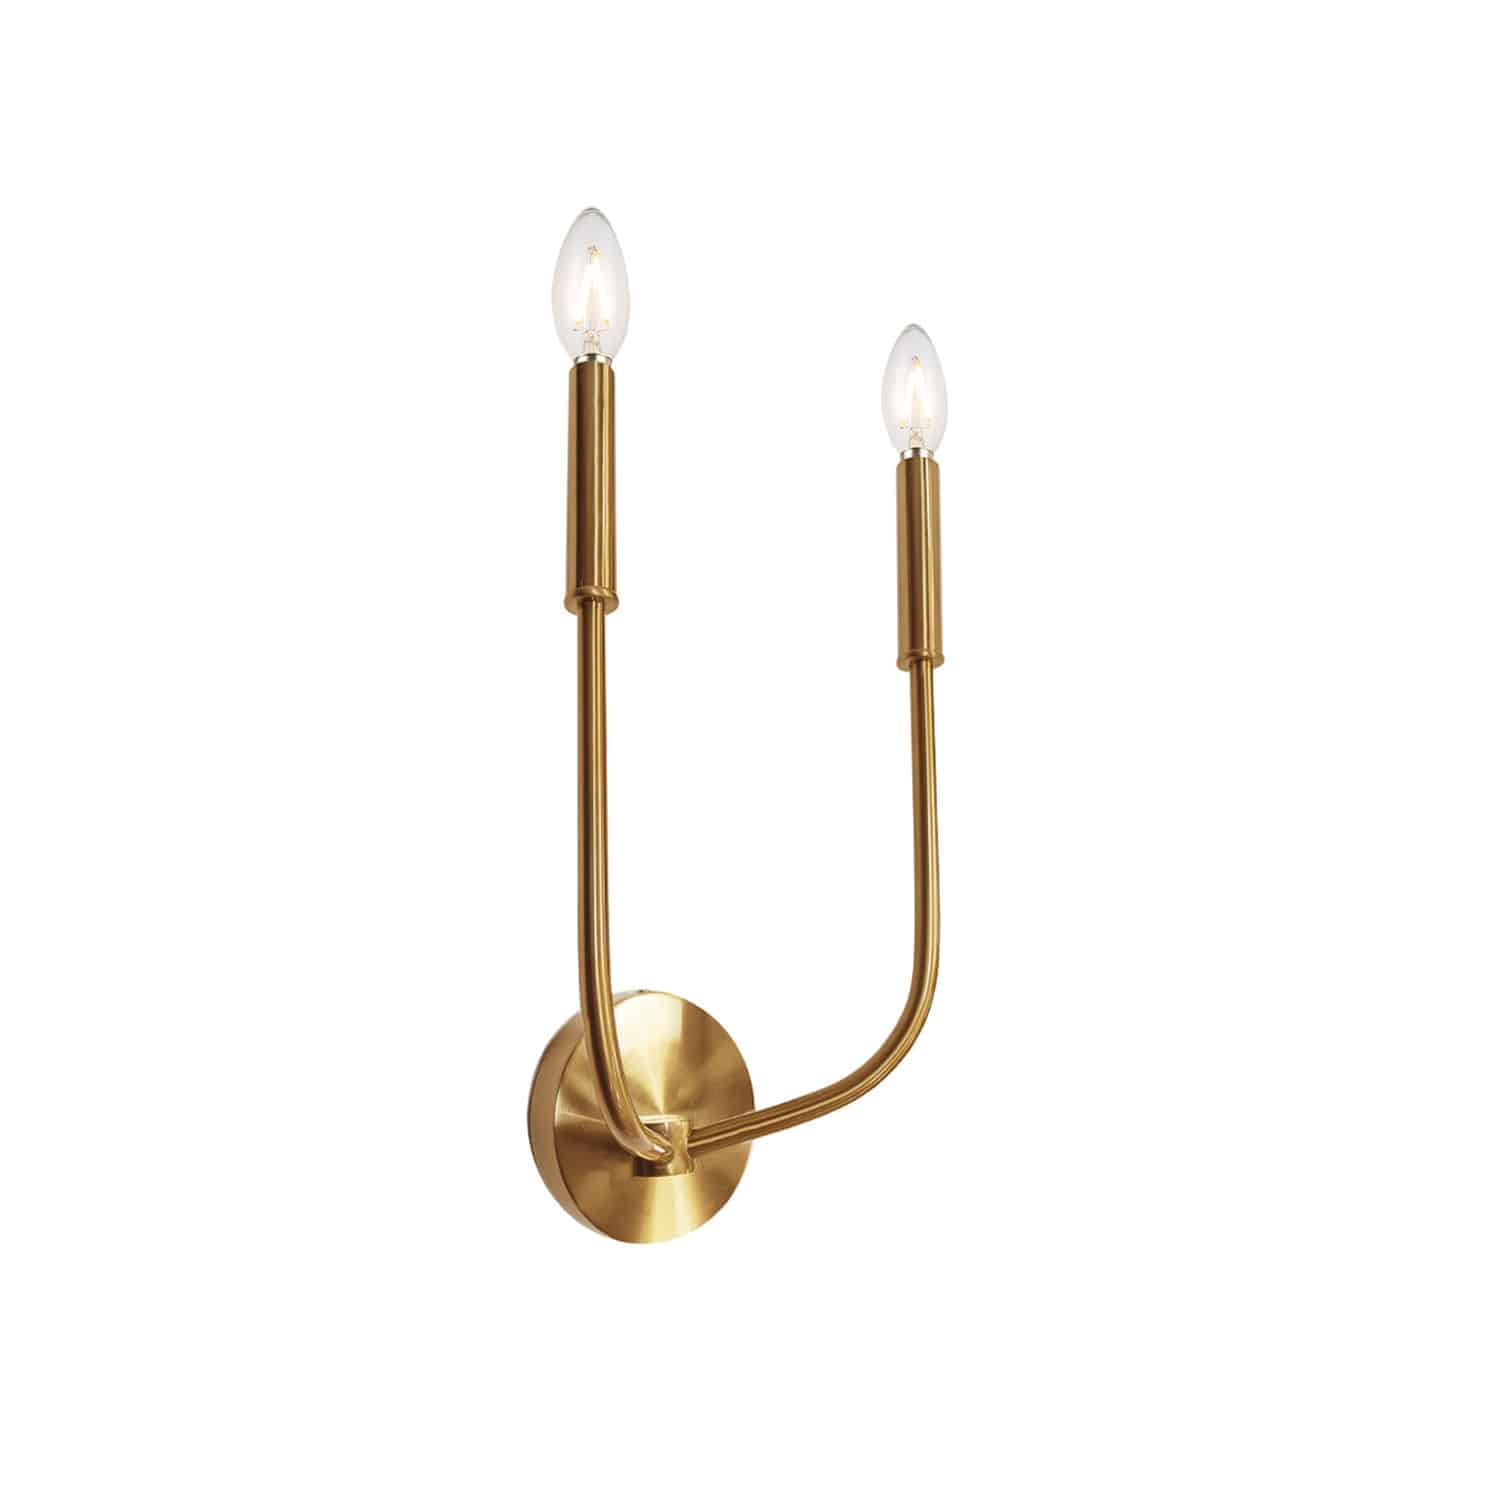 2LT Incandescent Wall Sconce, AGB